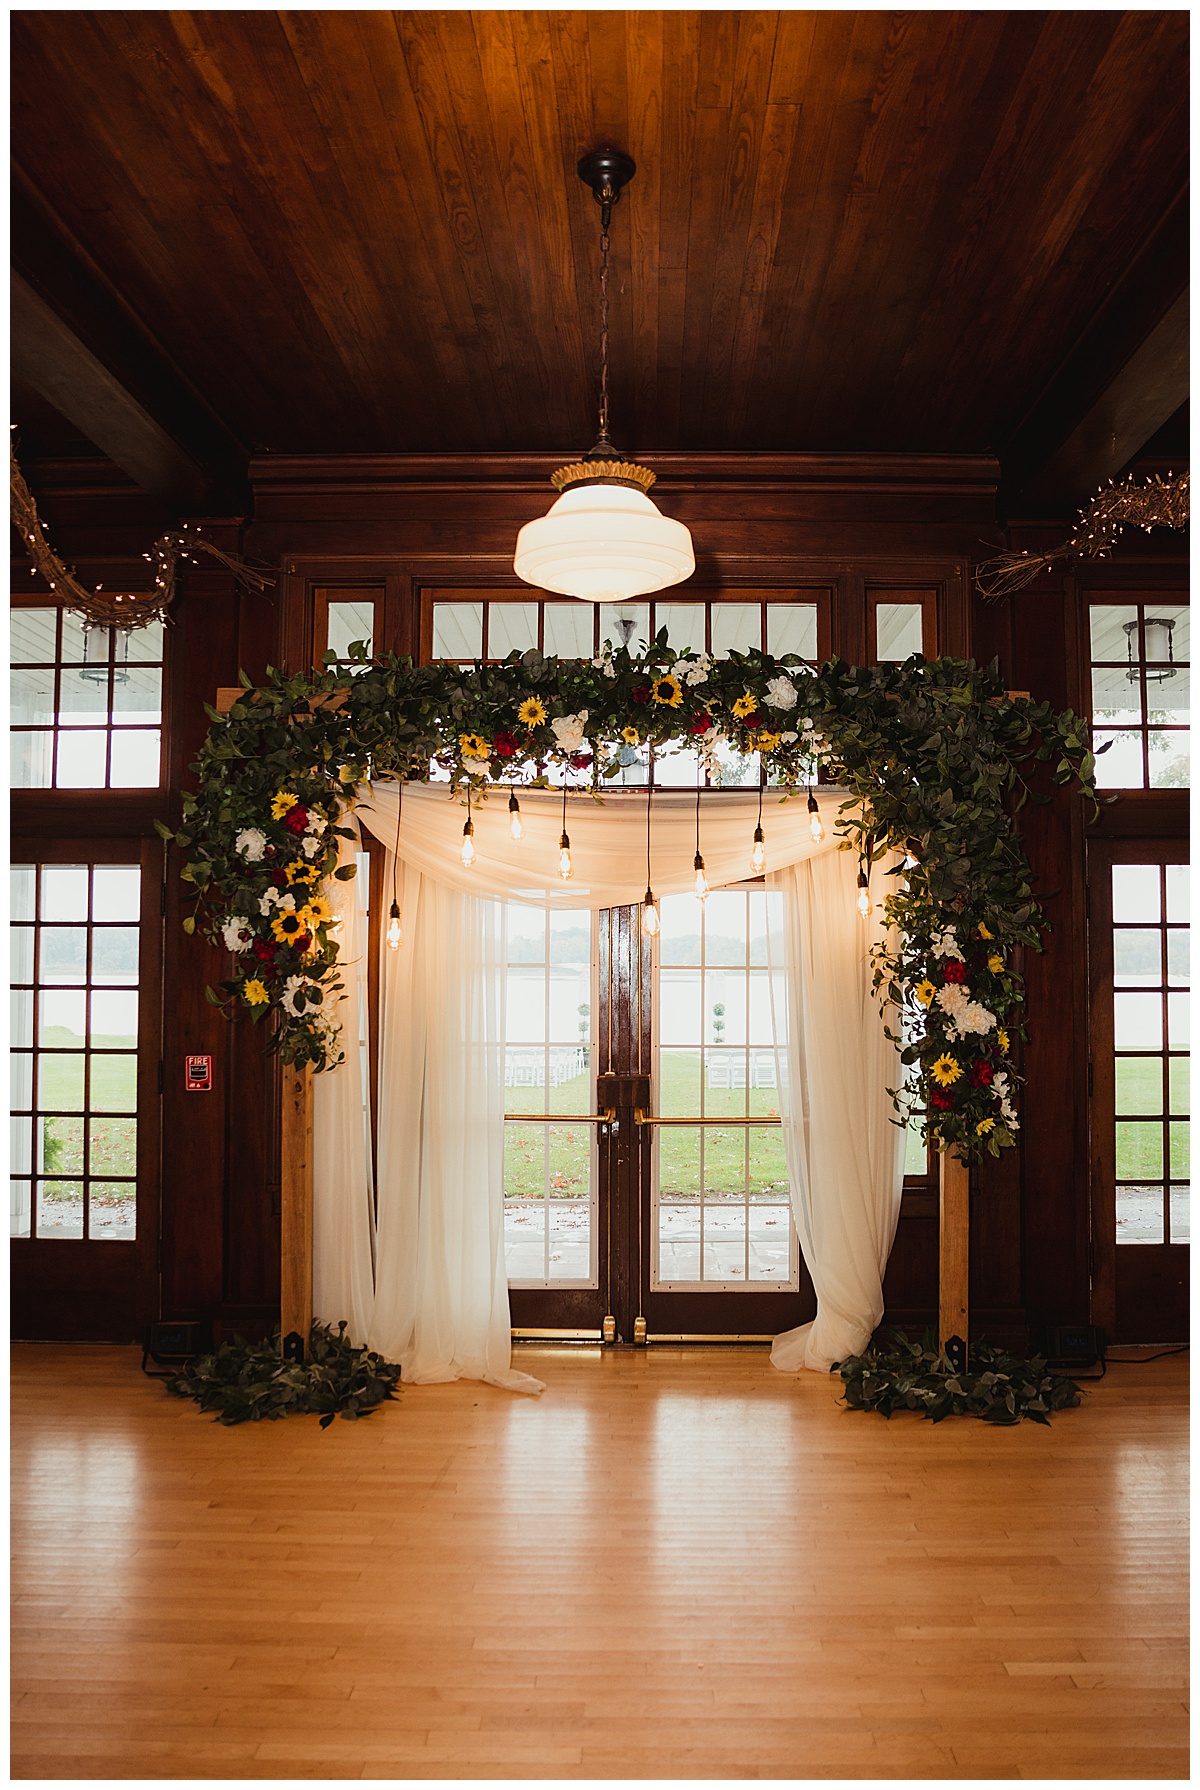 the wedding arch with white curtain and flowers